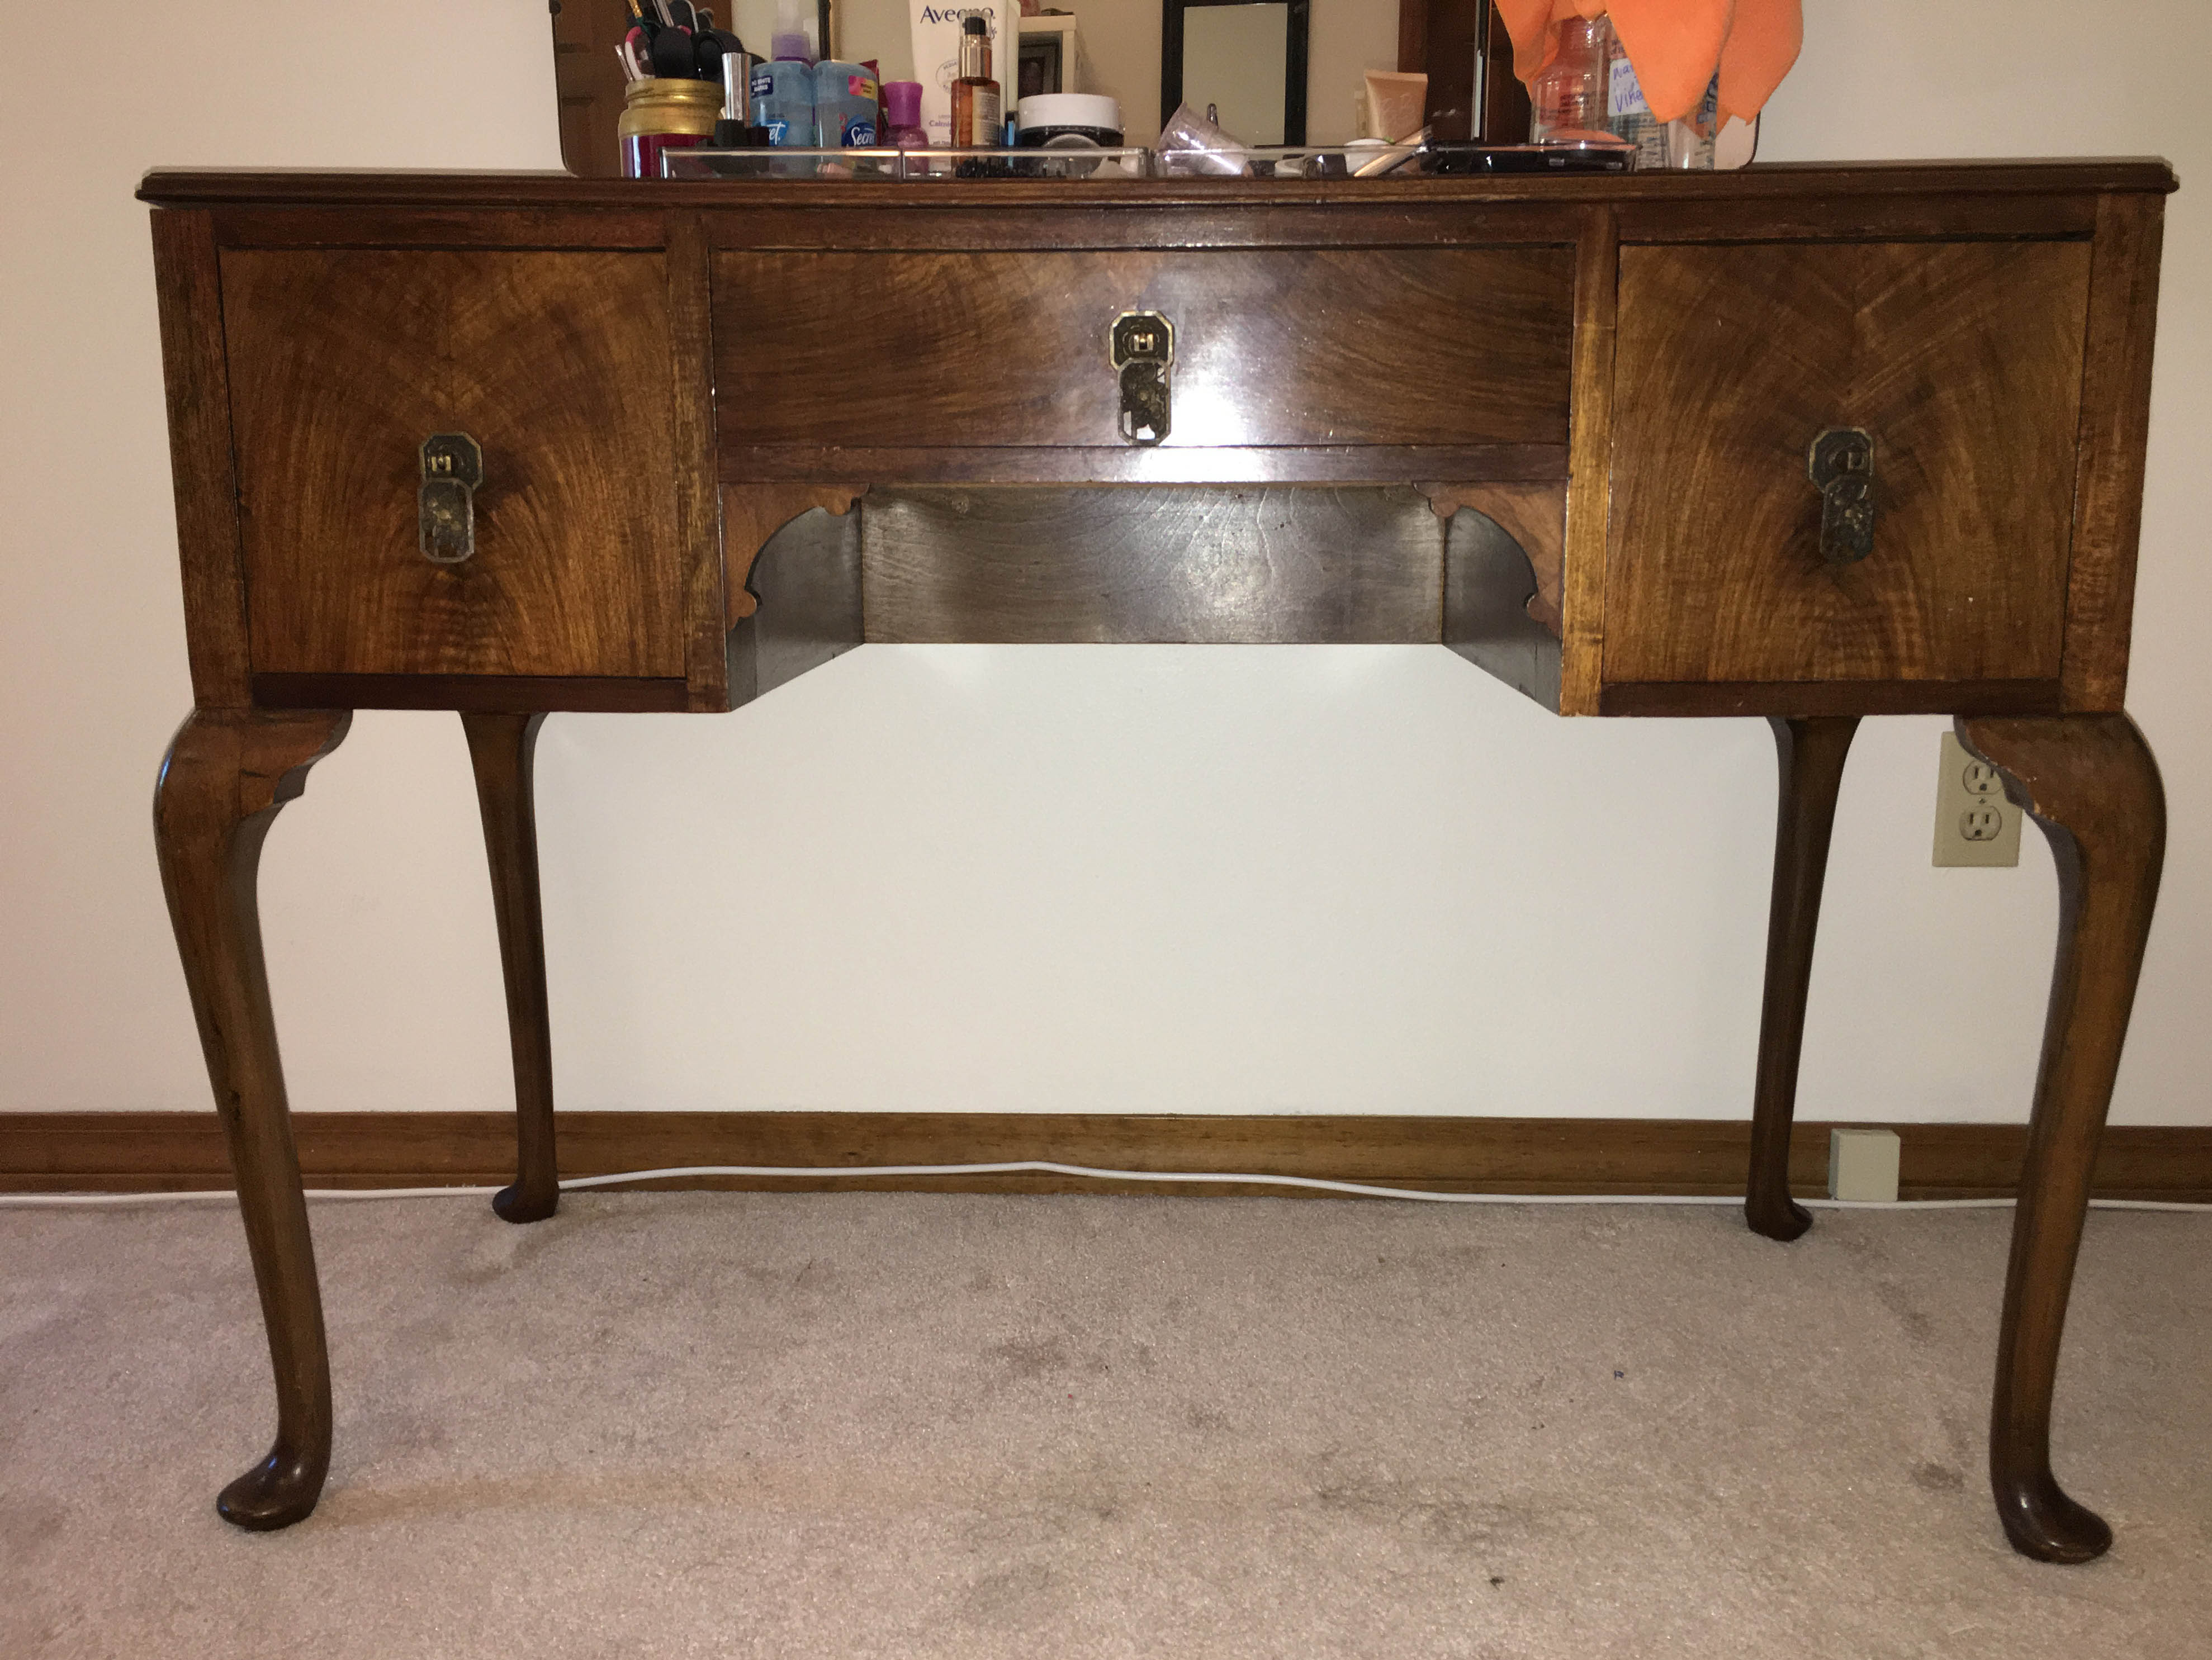 Antique Dressing Table Vanity Identification Help Antiques Board